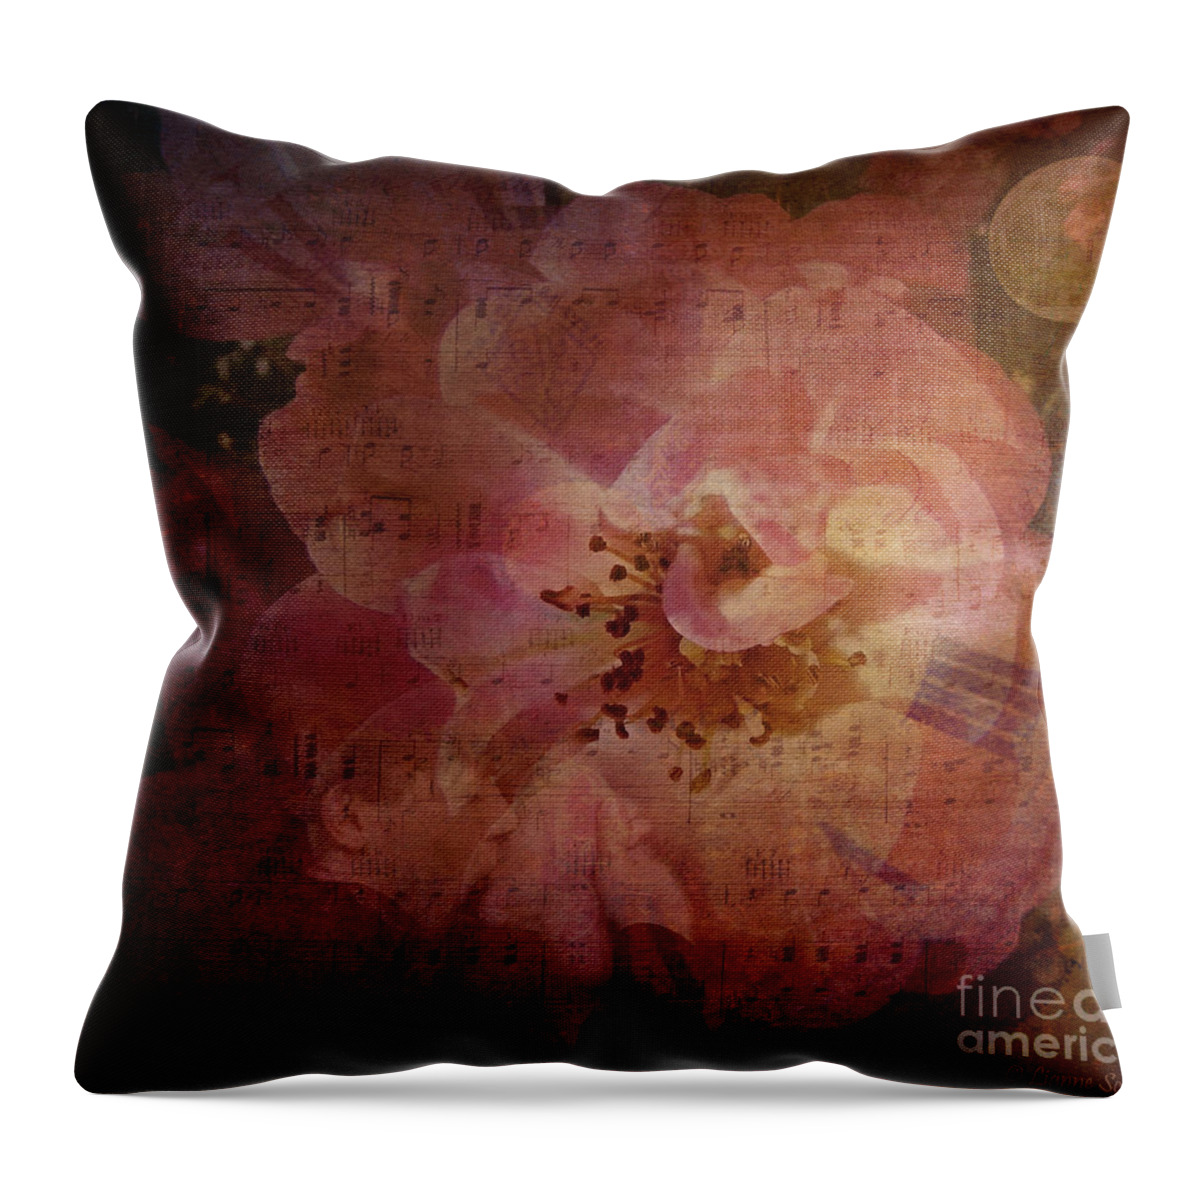 Roses Throw Pillow featuring the digital art As Time Goes By by Lianne Schneider